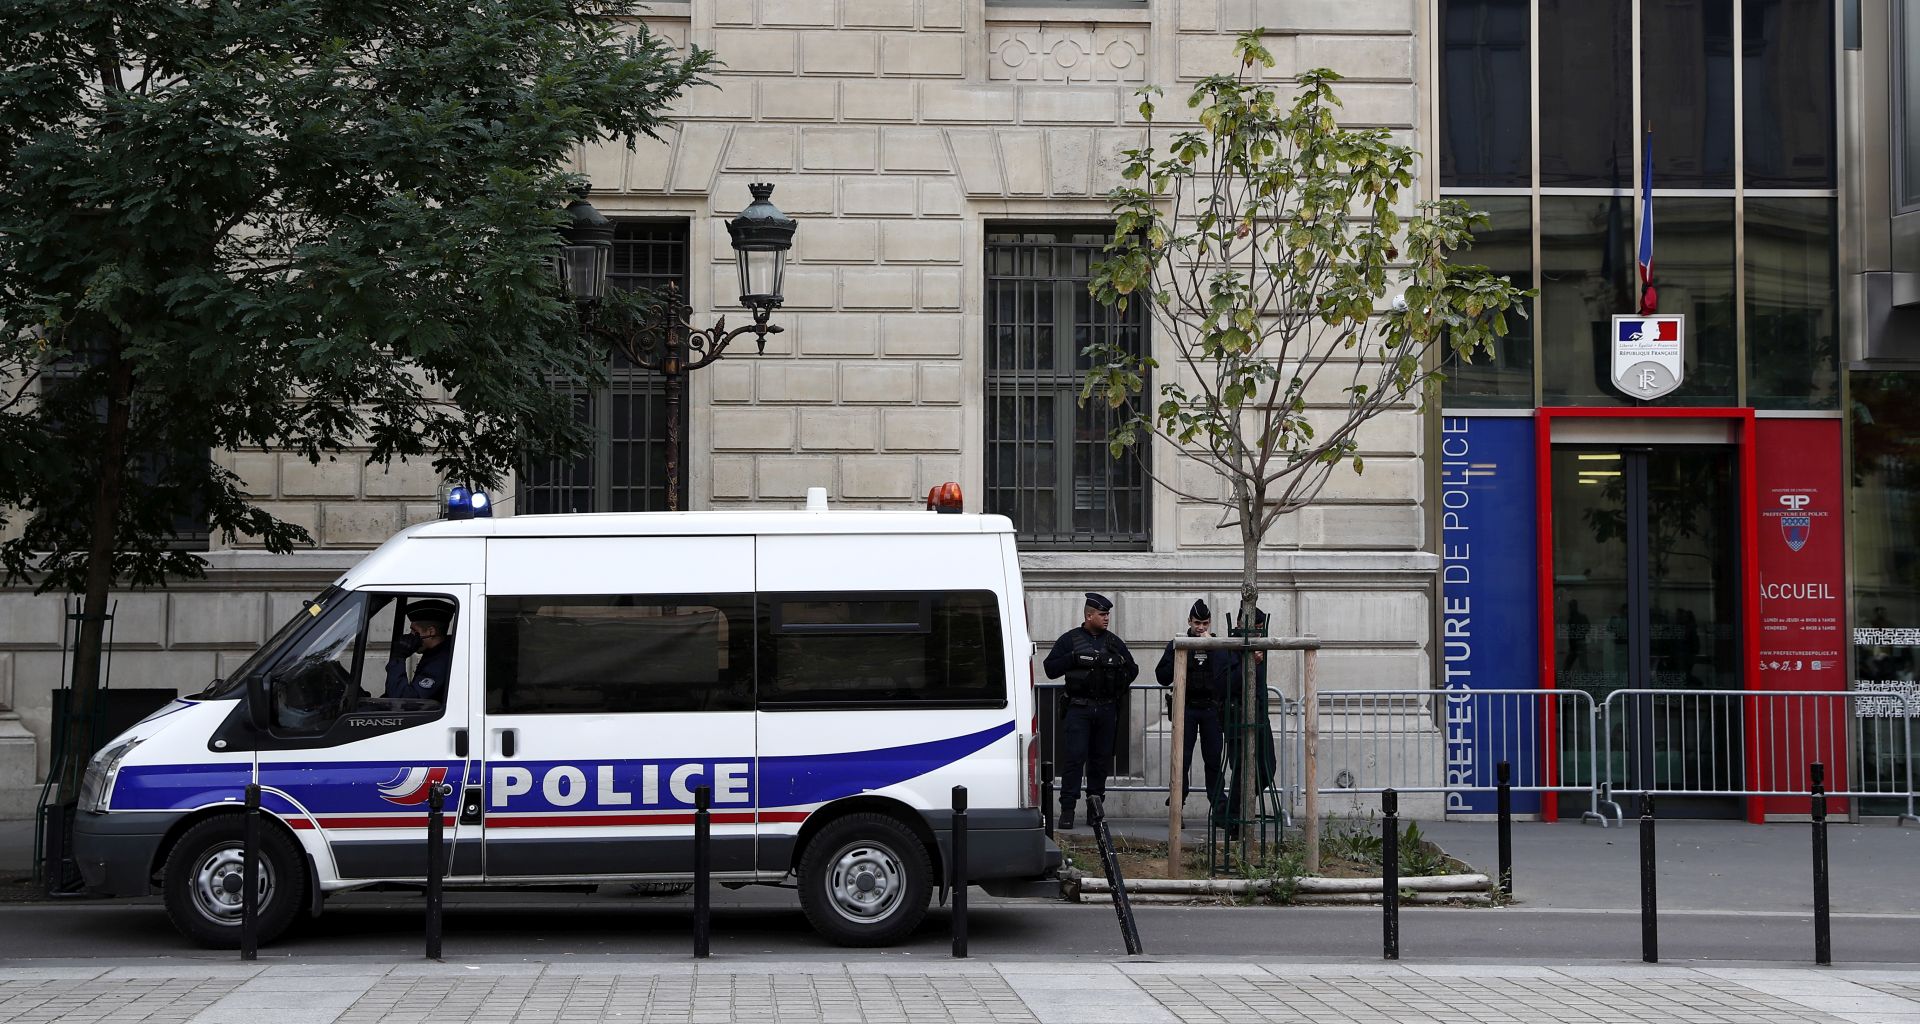 epa07891533 French police and security forces establish a security perimeter near the police headquarters in Paris, France, 03 October 2019. According to reports, a man was killed after attacking officers with a knife. Two officers were injured in the incident.  EPA/IAN LANGSDON